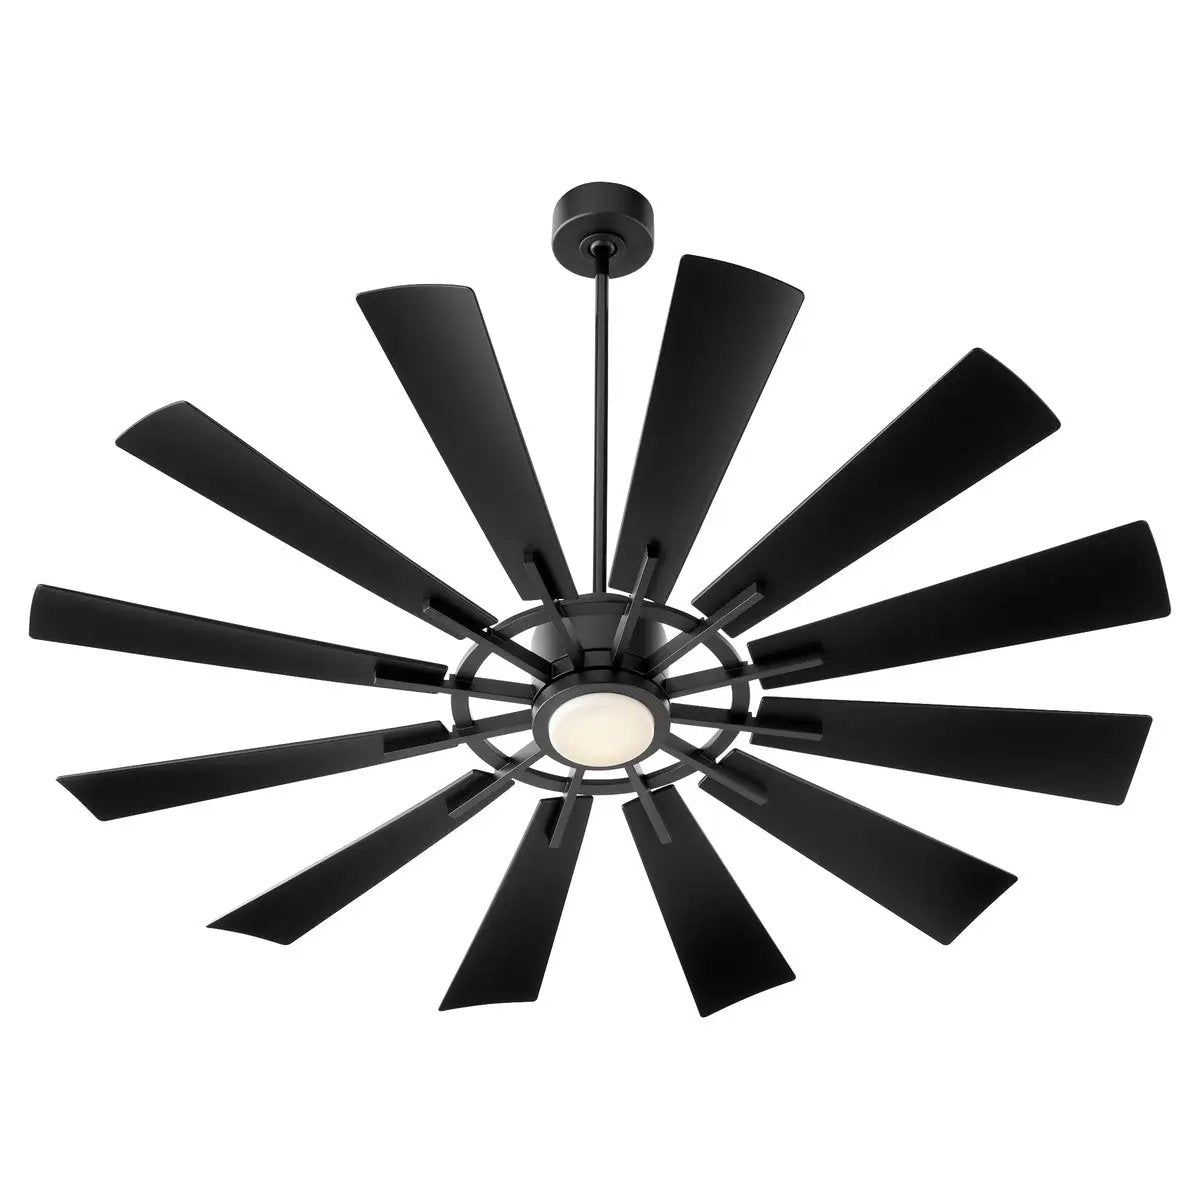 Outdoor Ceiling Fan with Light, featuring a multi-blade system attached to a dark chromatic housing motor and iron elements. Designed for high-performance outdoor air circulation. 6-speed options. UL Listed for damp locations. 12 blades, 60" span, 14-degree pitch. LED lamp included.